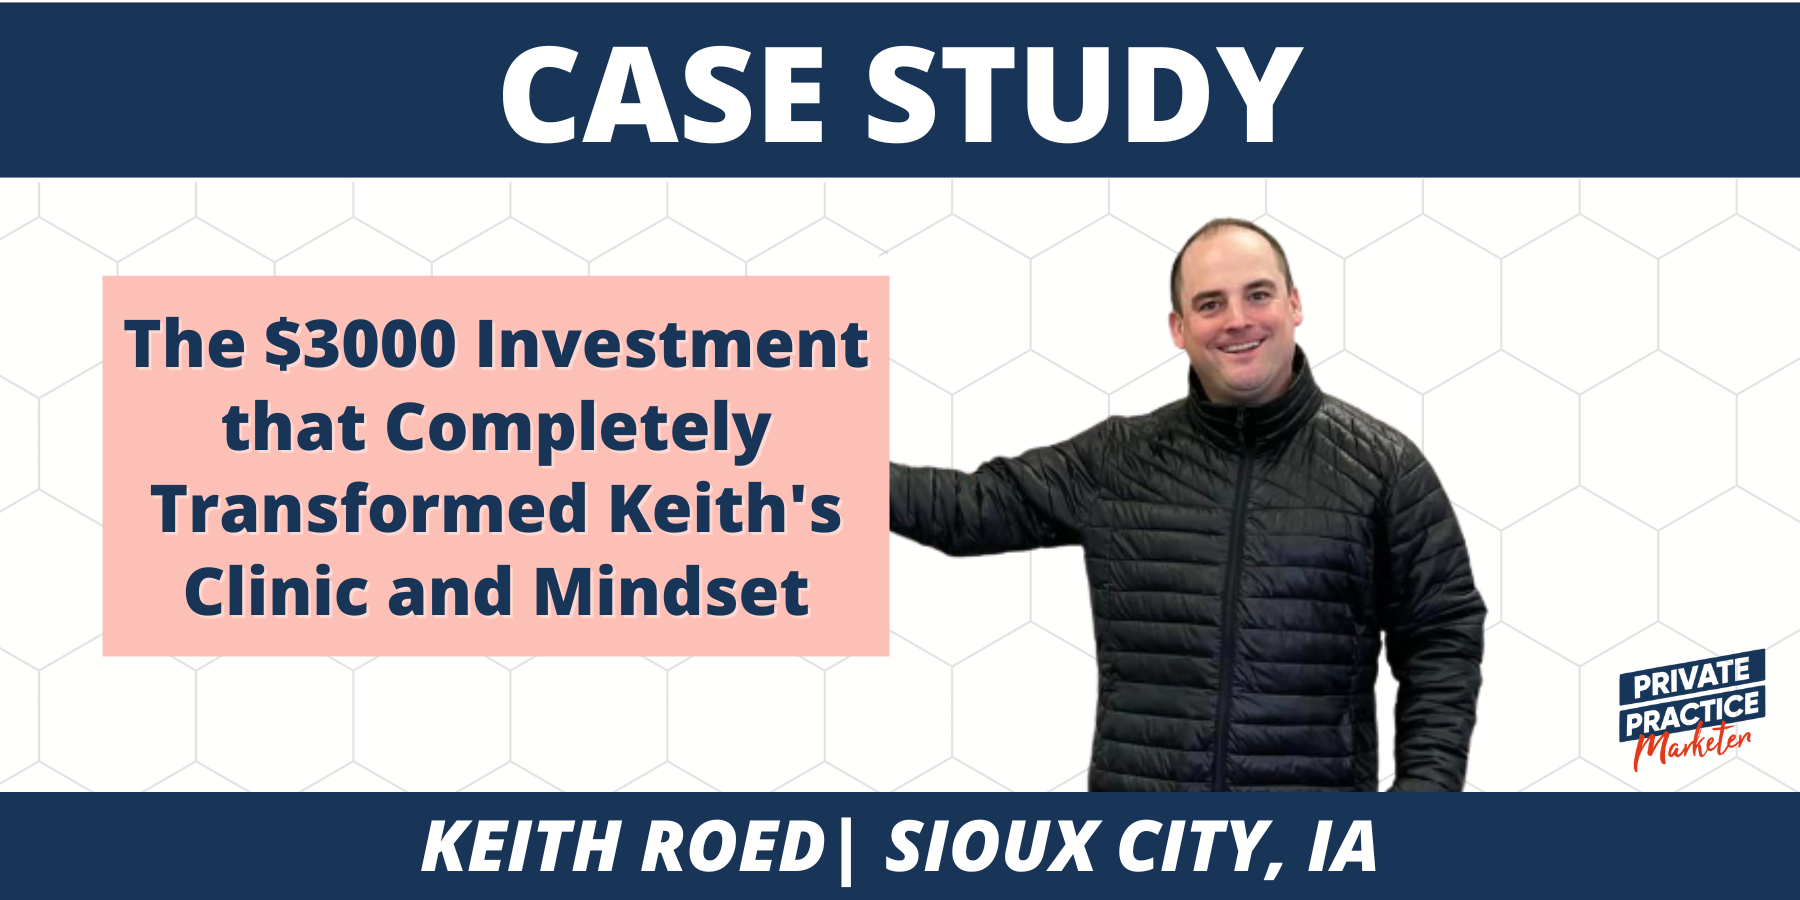 “The $3000 Investment that Completely Transformed Keith’s Clinic and Mindset”